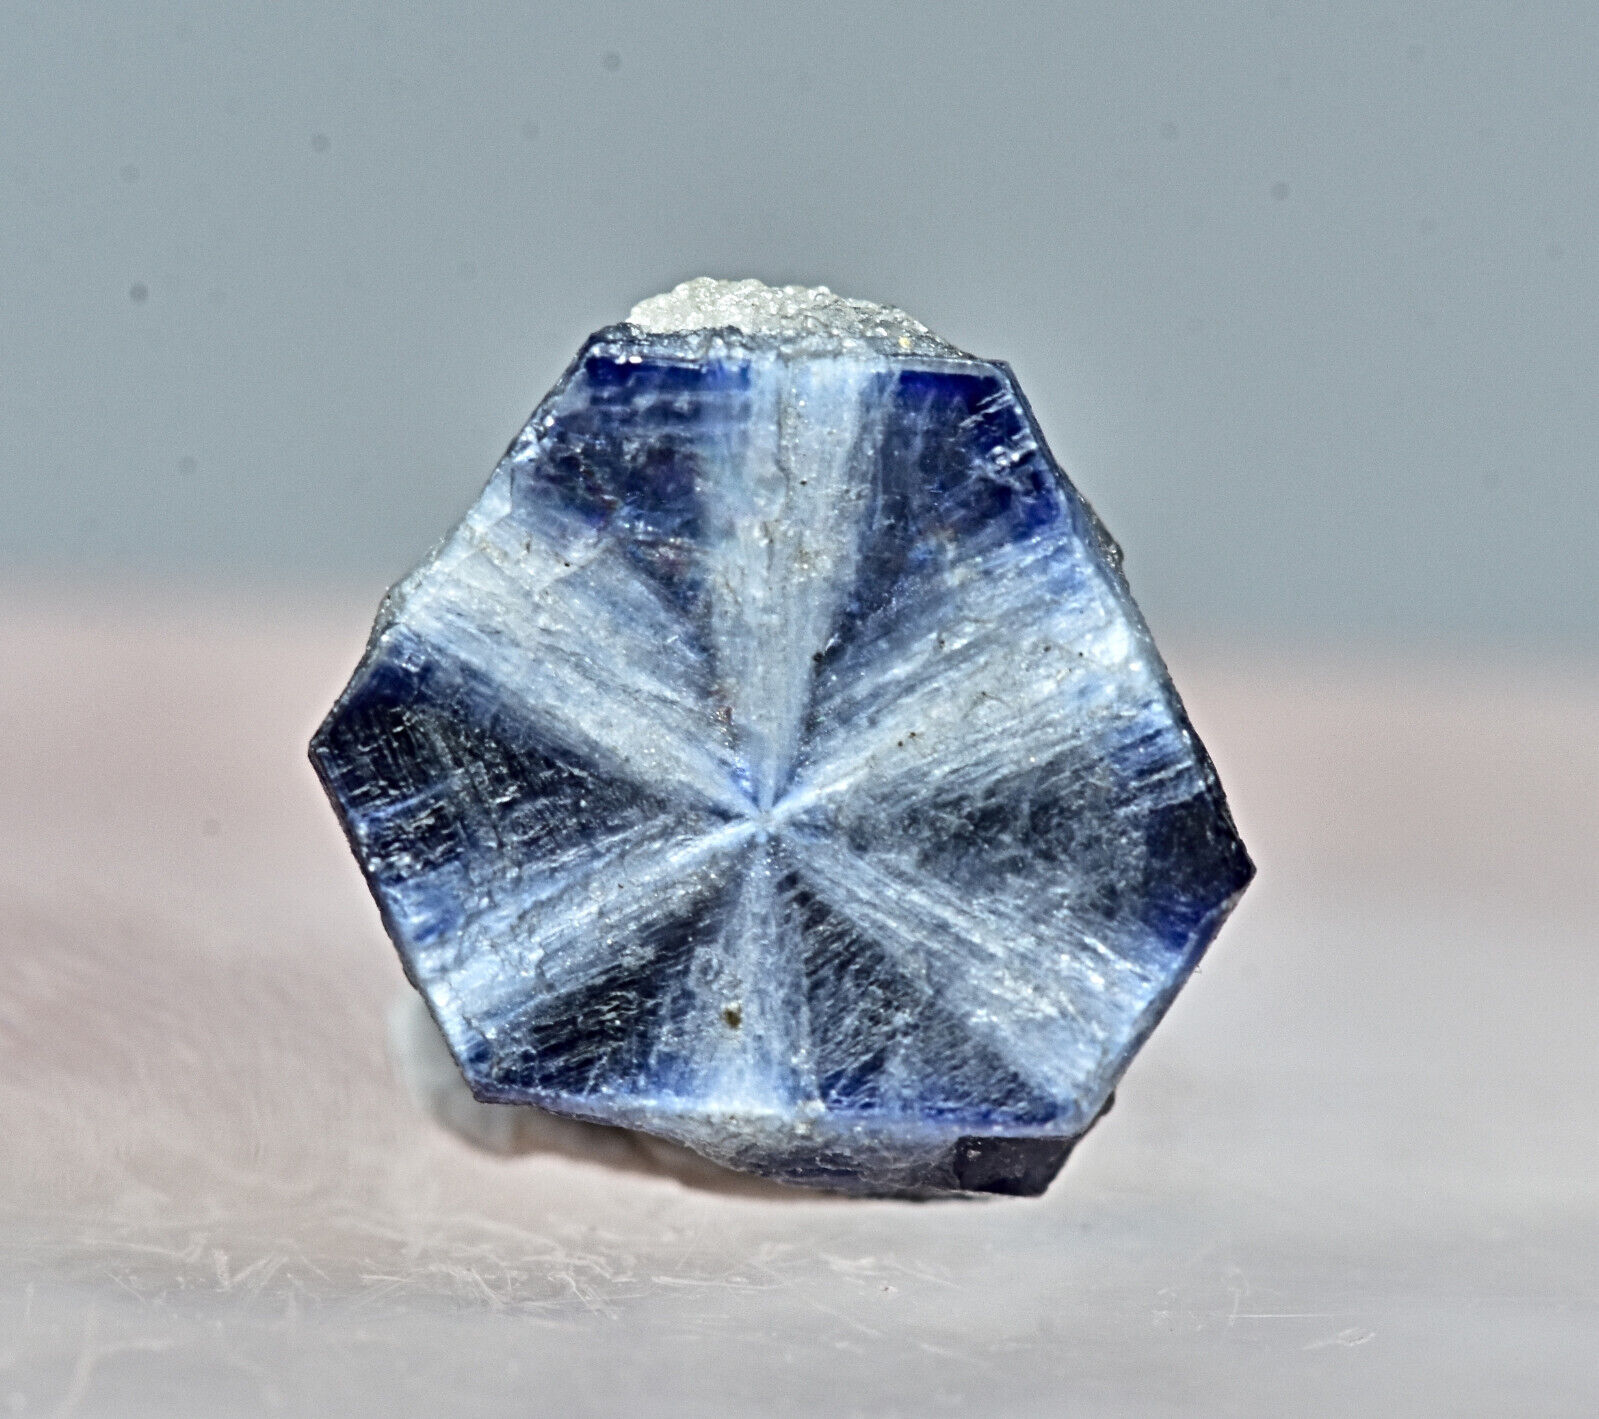 %100 Natural Unpolished Trapiche Sapphire Crystal From Badakhshan Afg 2.40 Carat